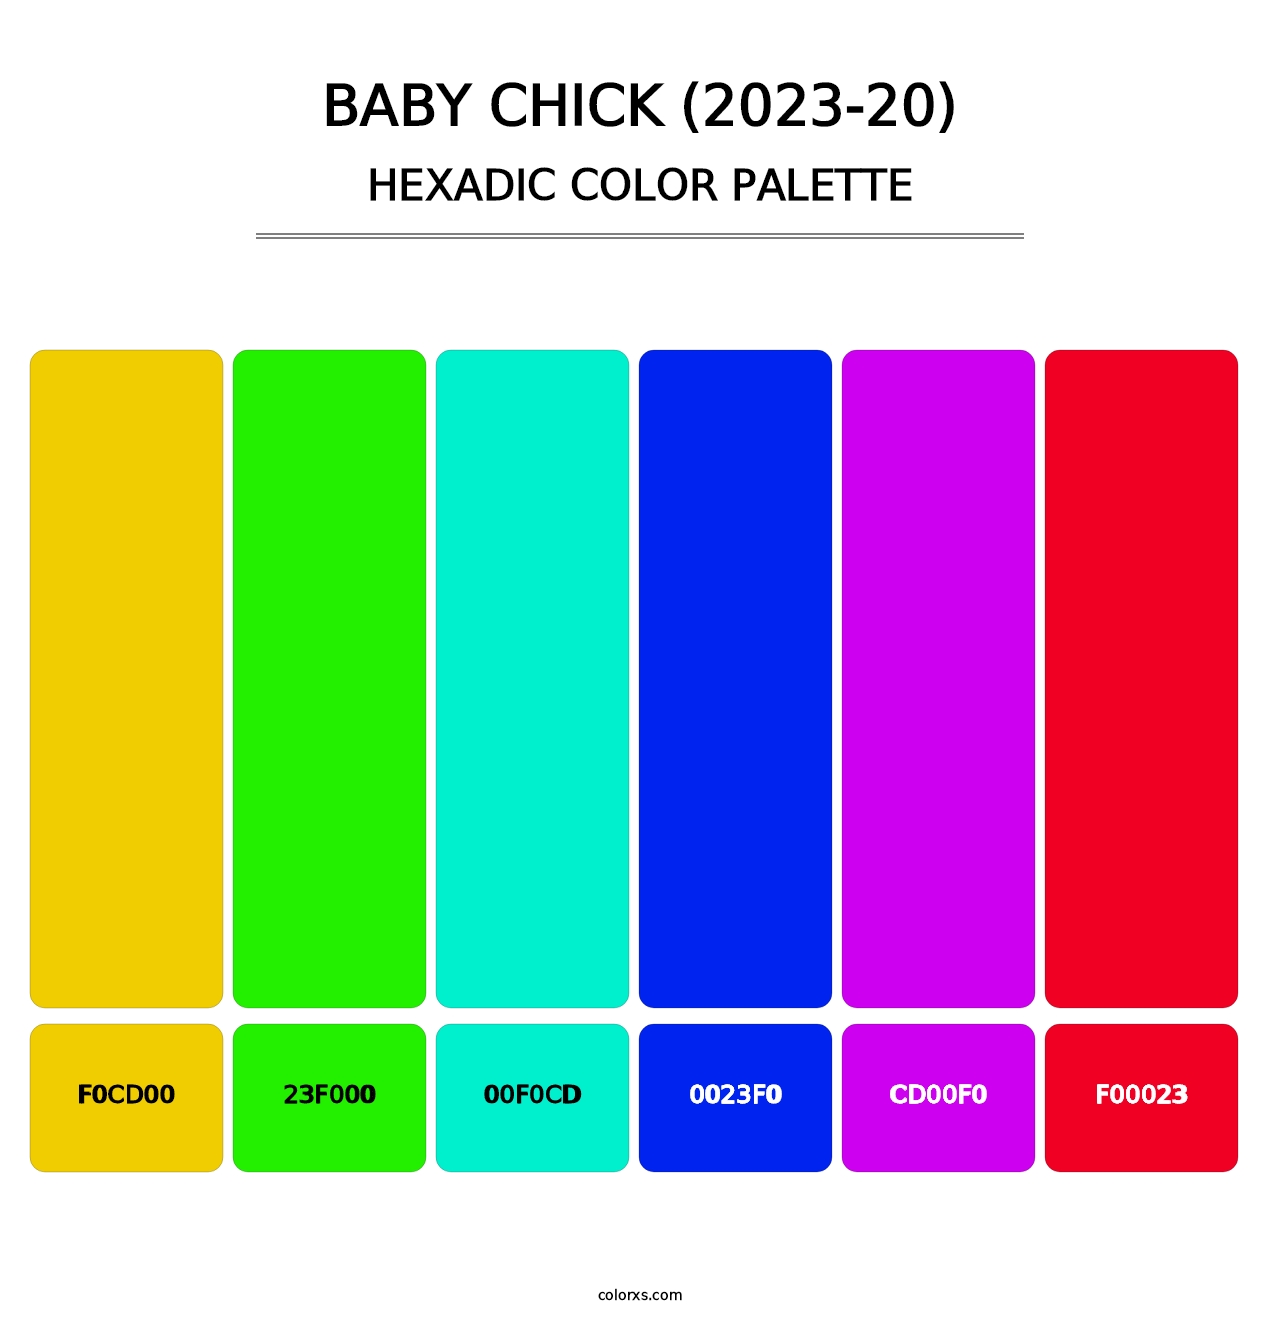 Baby Chick (2023-20) - Hexadic Color Palette